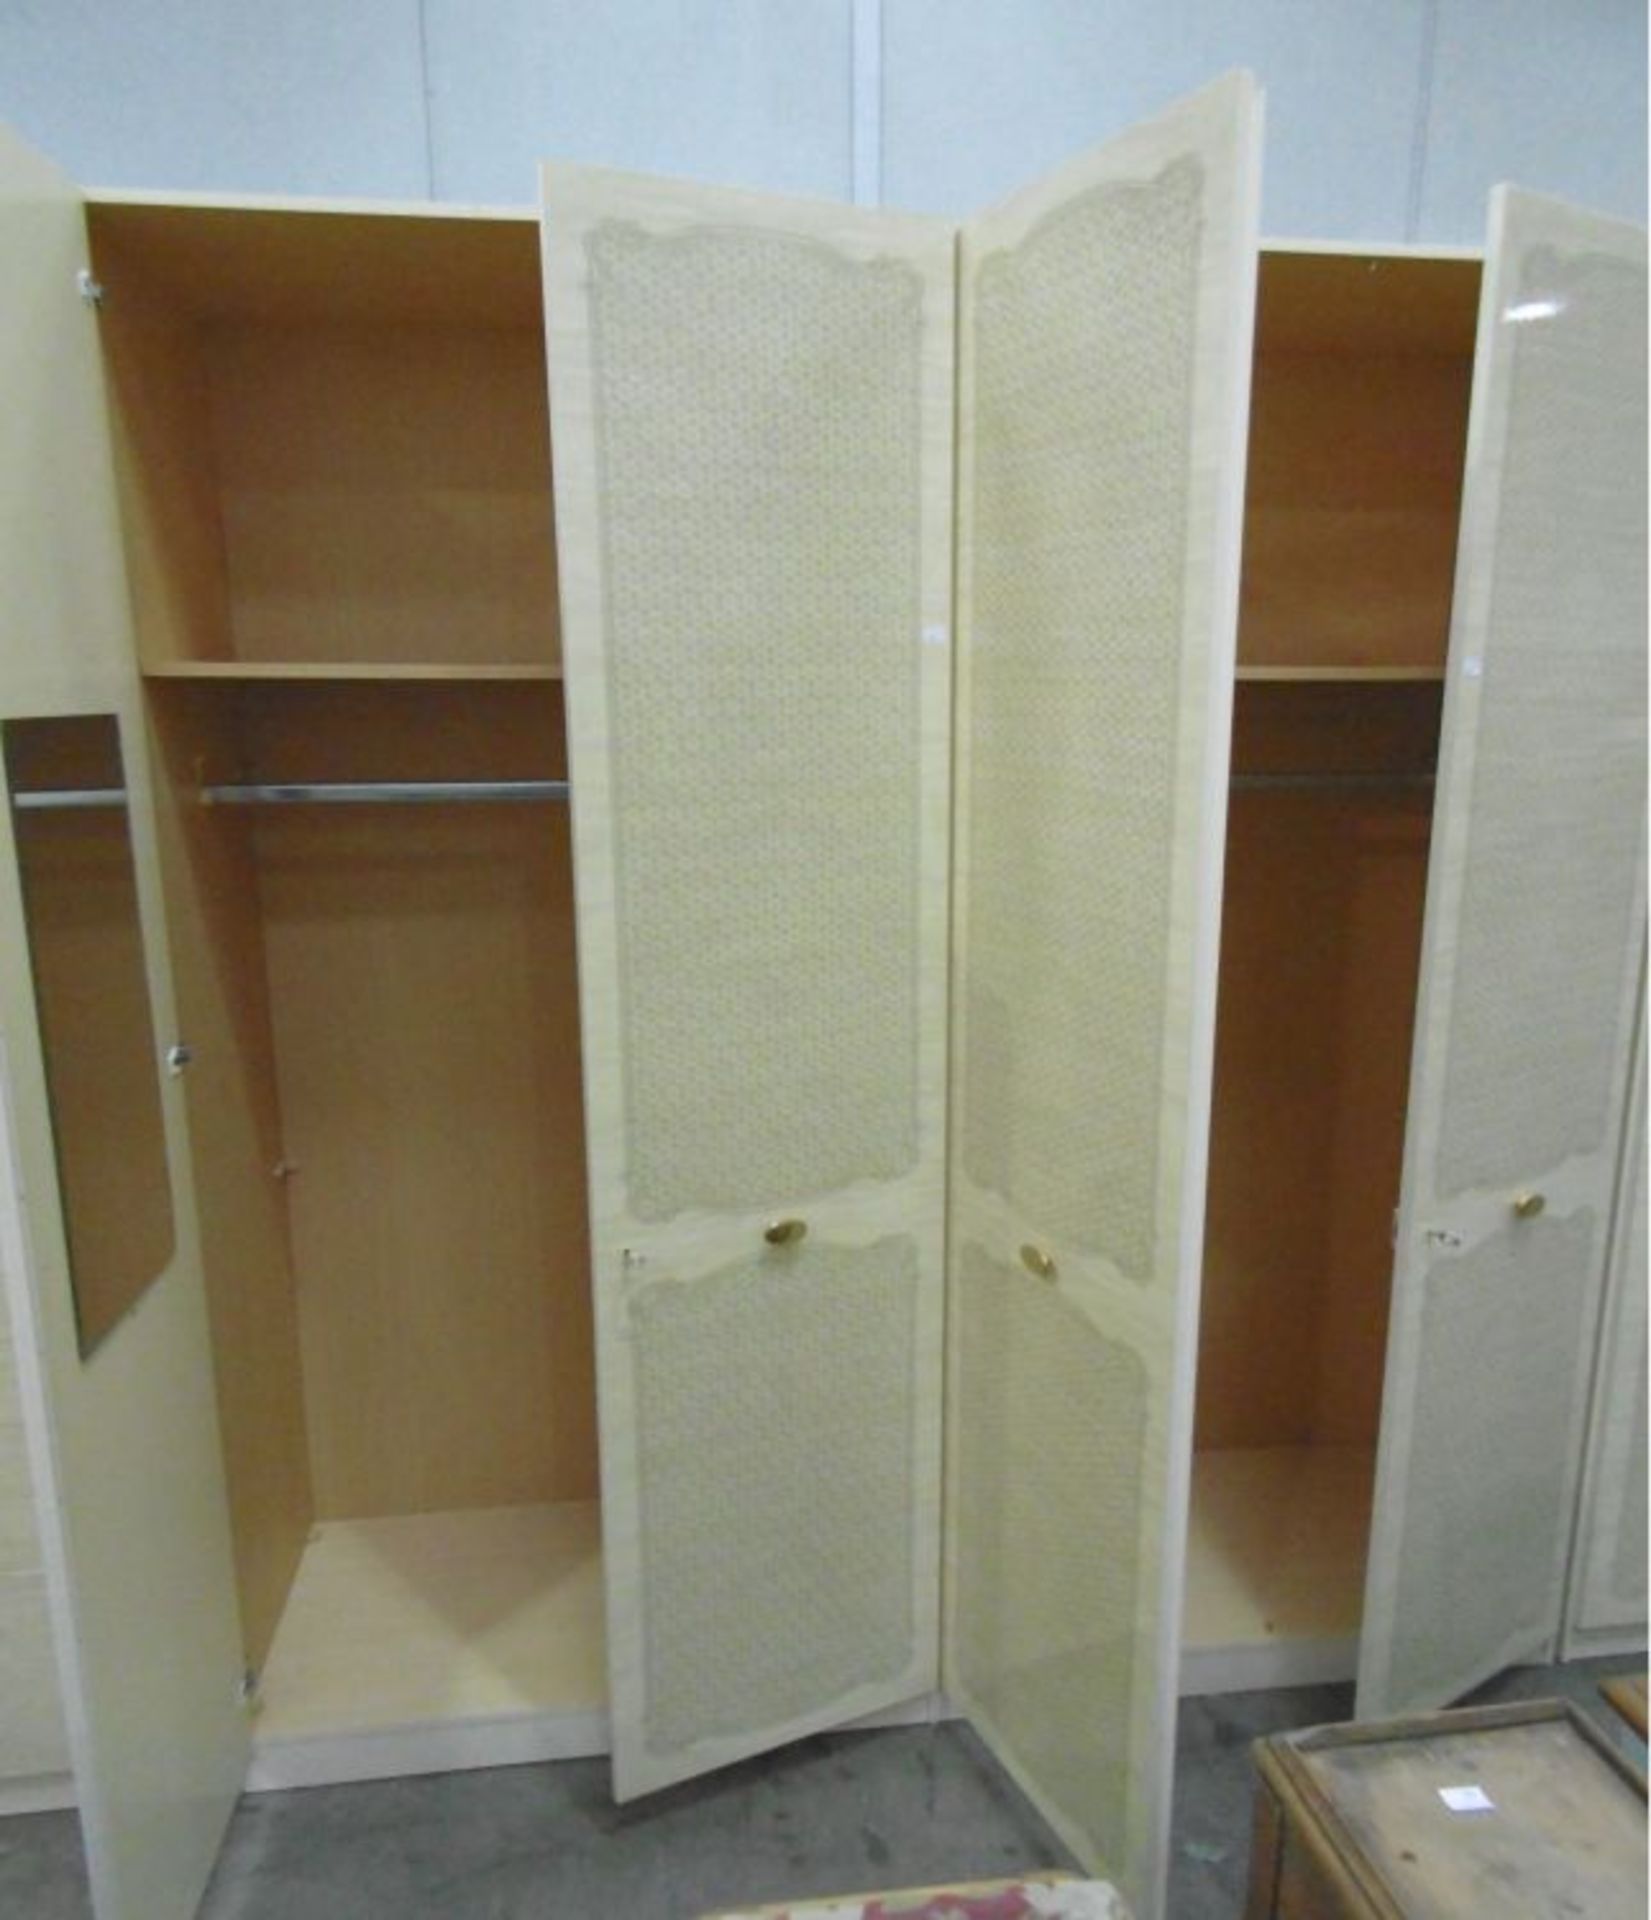 A substantial and tall figured cream melamine Wardrobe Unit comprising two double wardrobes - Image 2 of 2